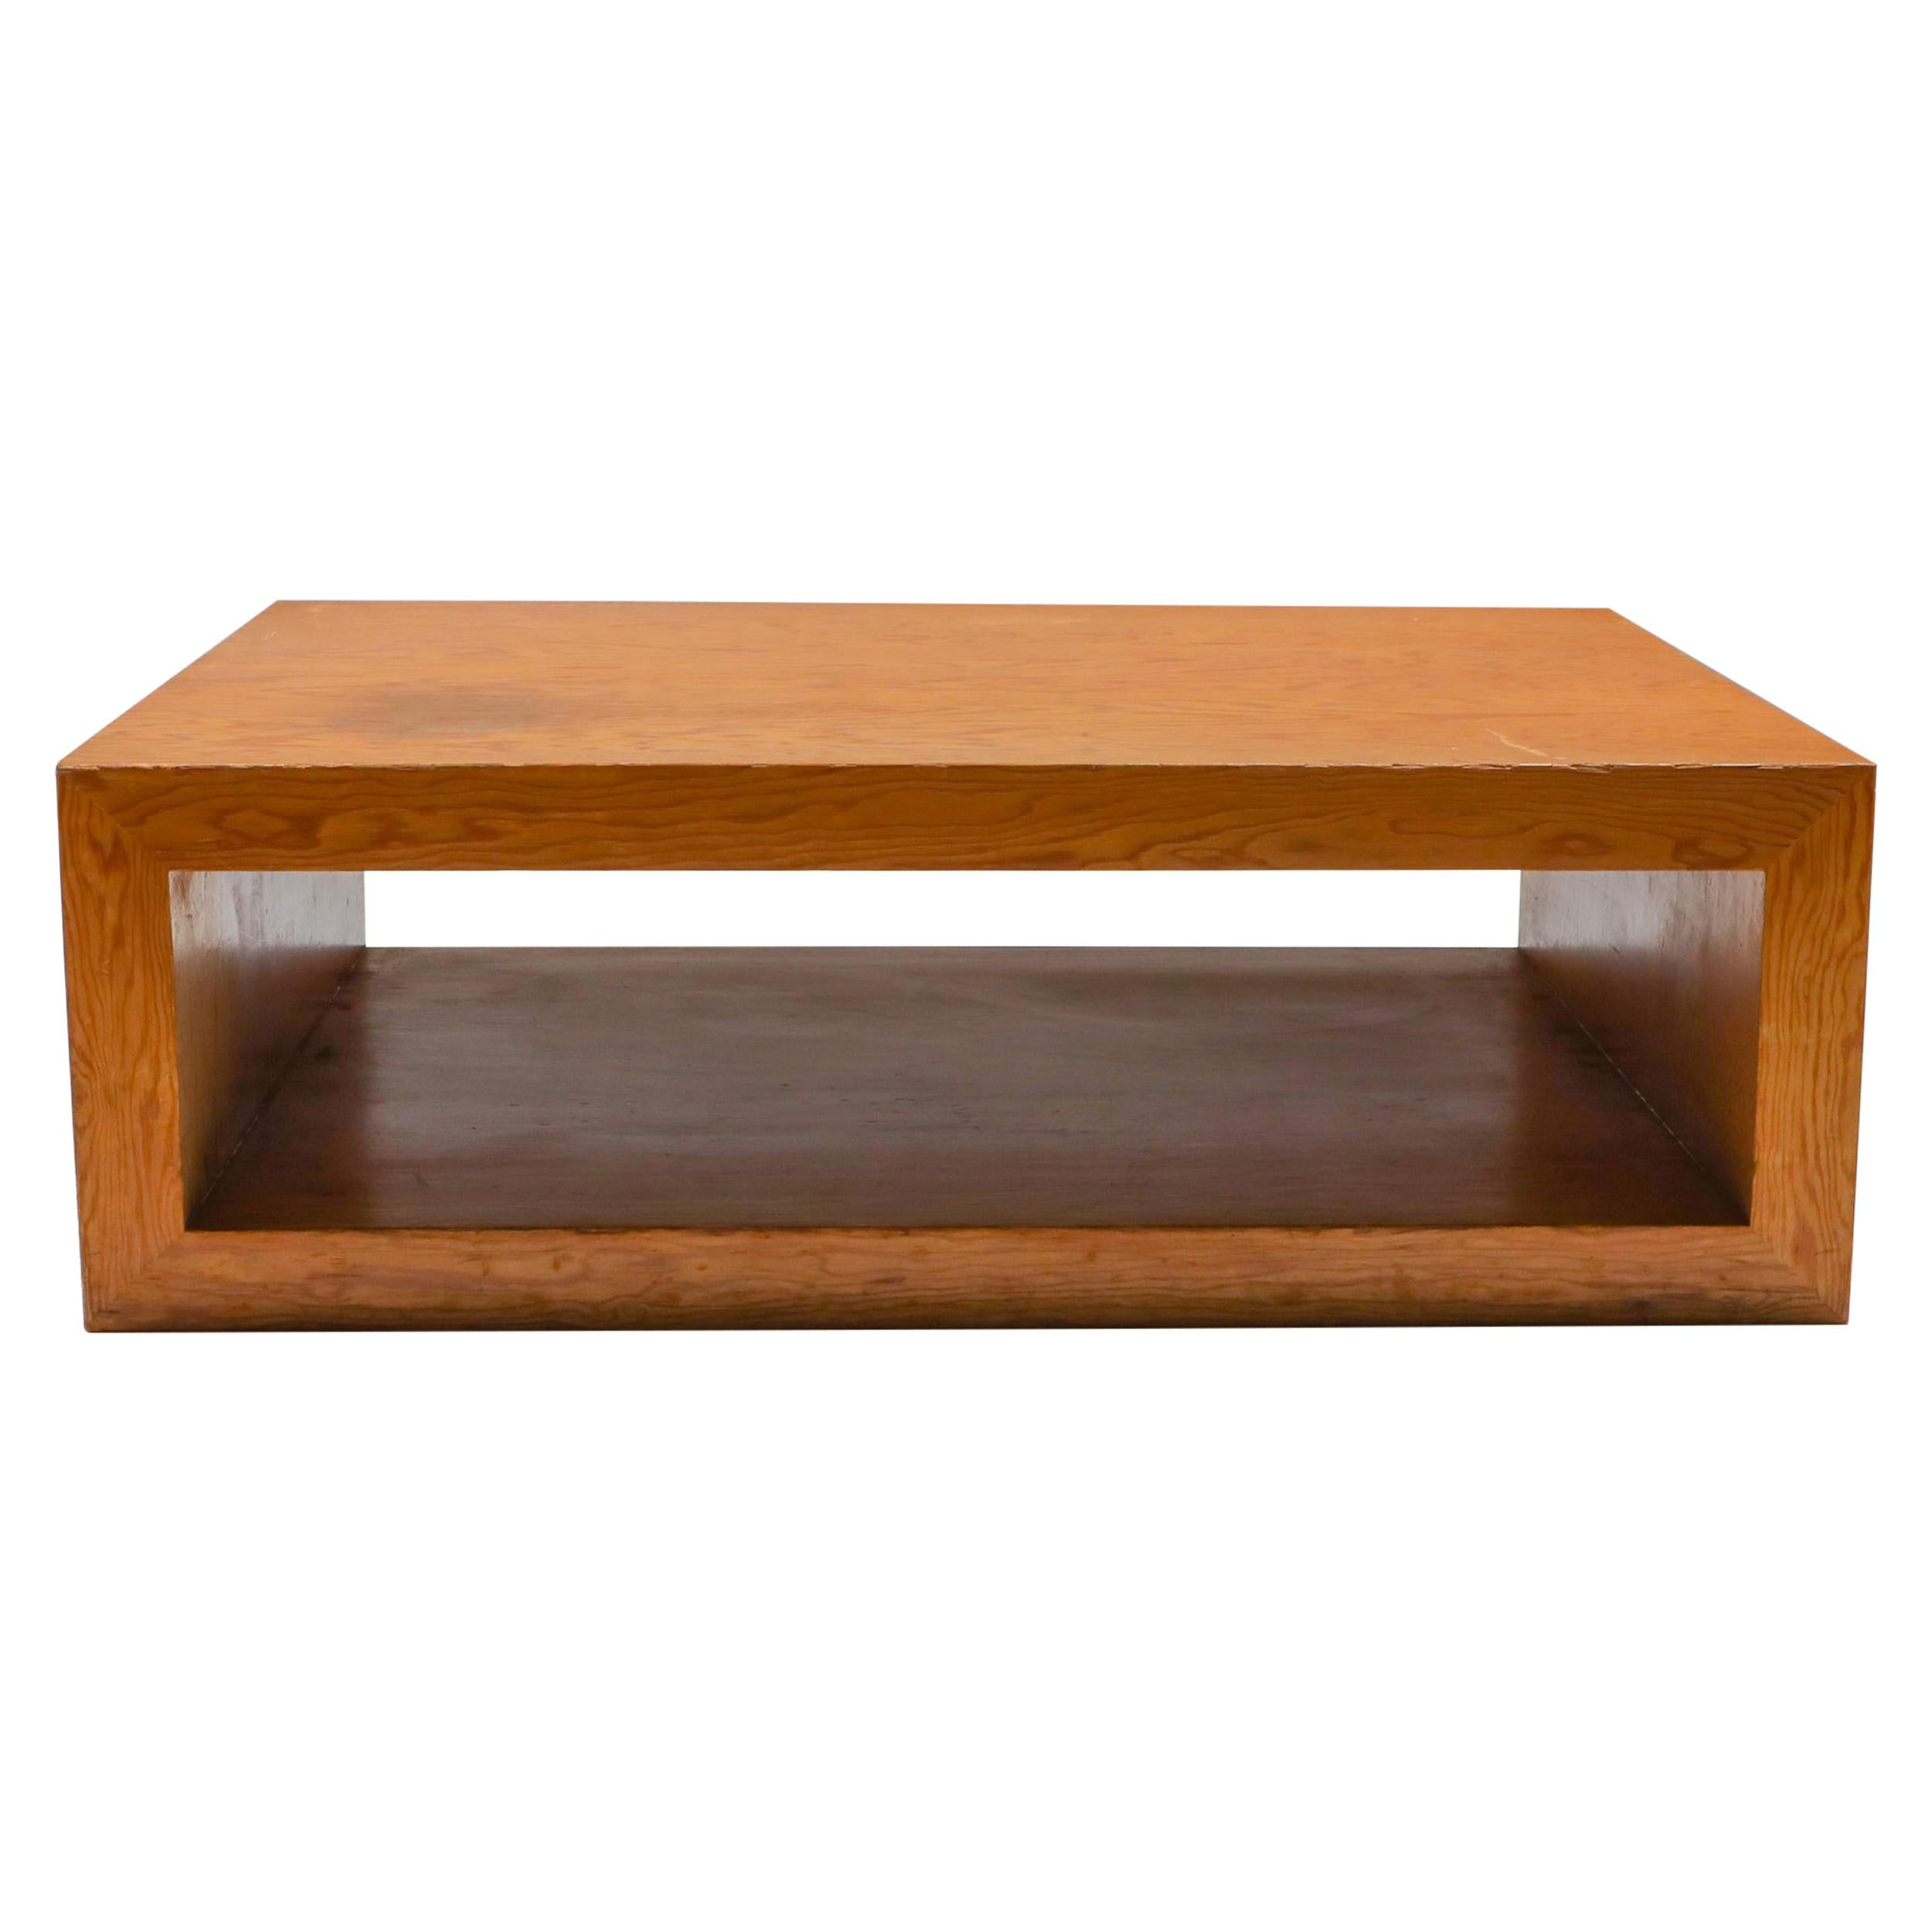 Pitch Pine Midcentury Coffee Table